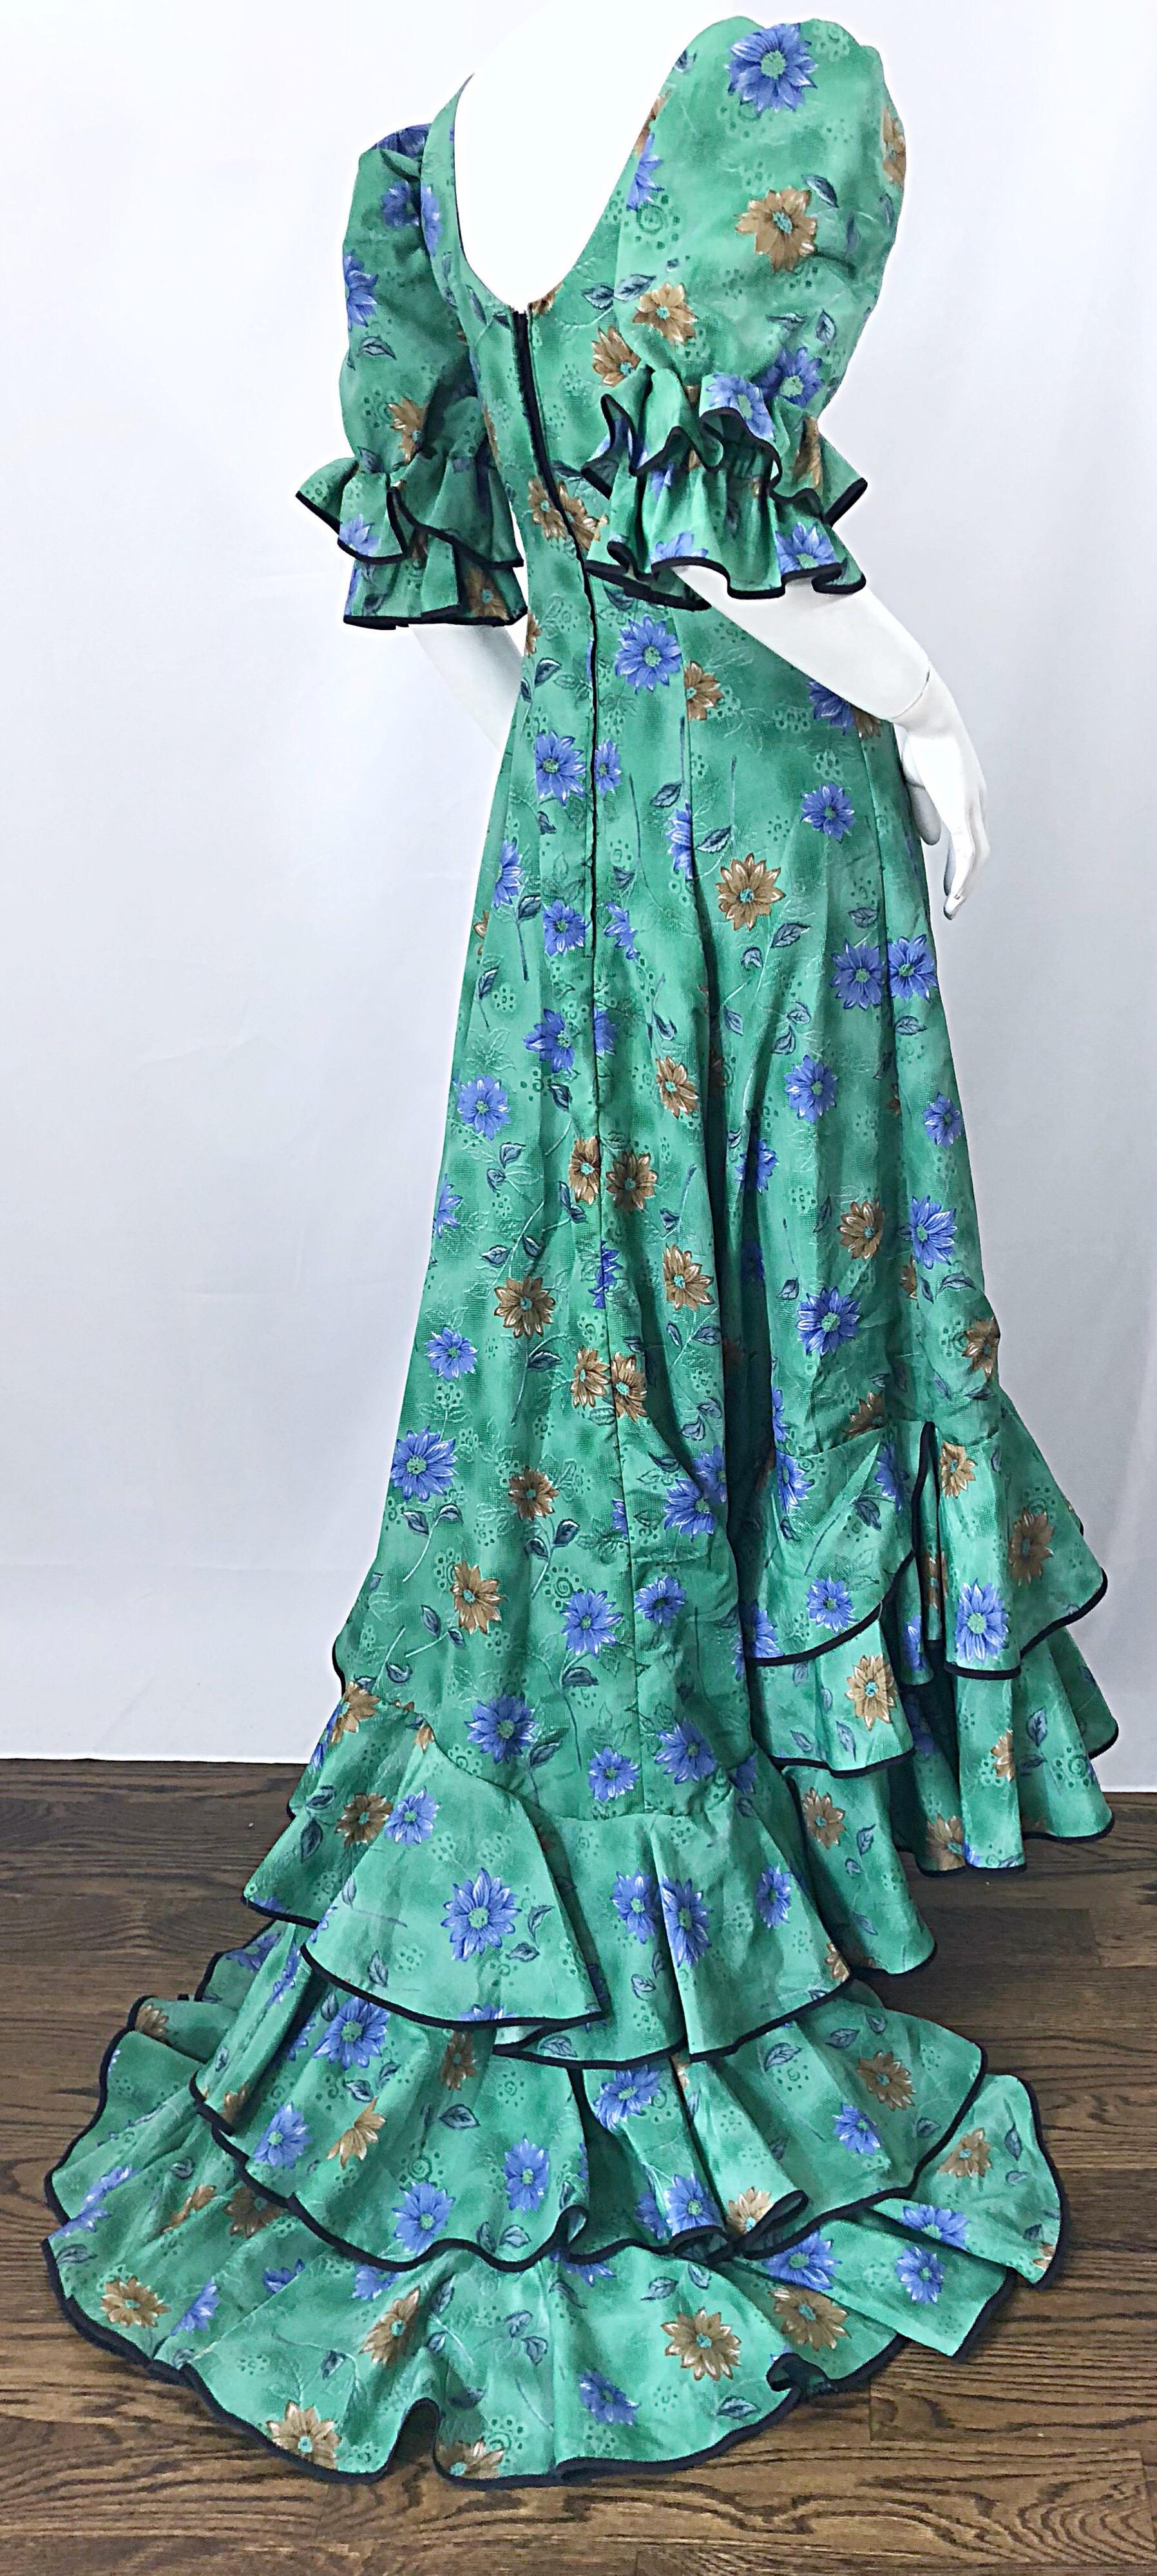 Amazing Vintage Victorian Inspired 1970s Does 1800s Steampunk Green Trained Gown In Excellent Condition For Sale In San Diego, CA